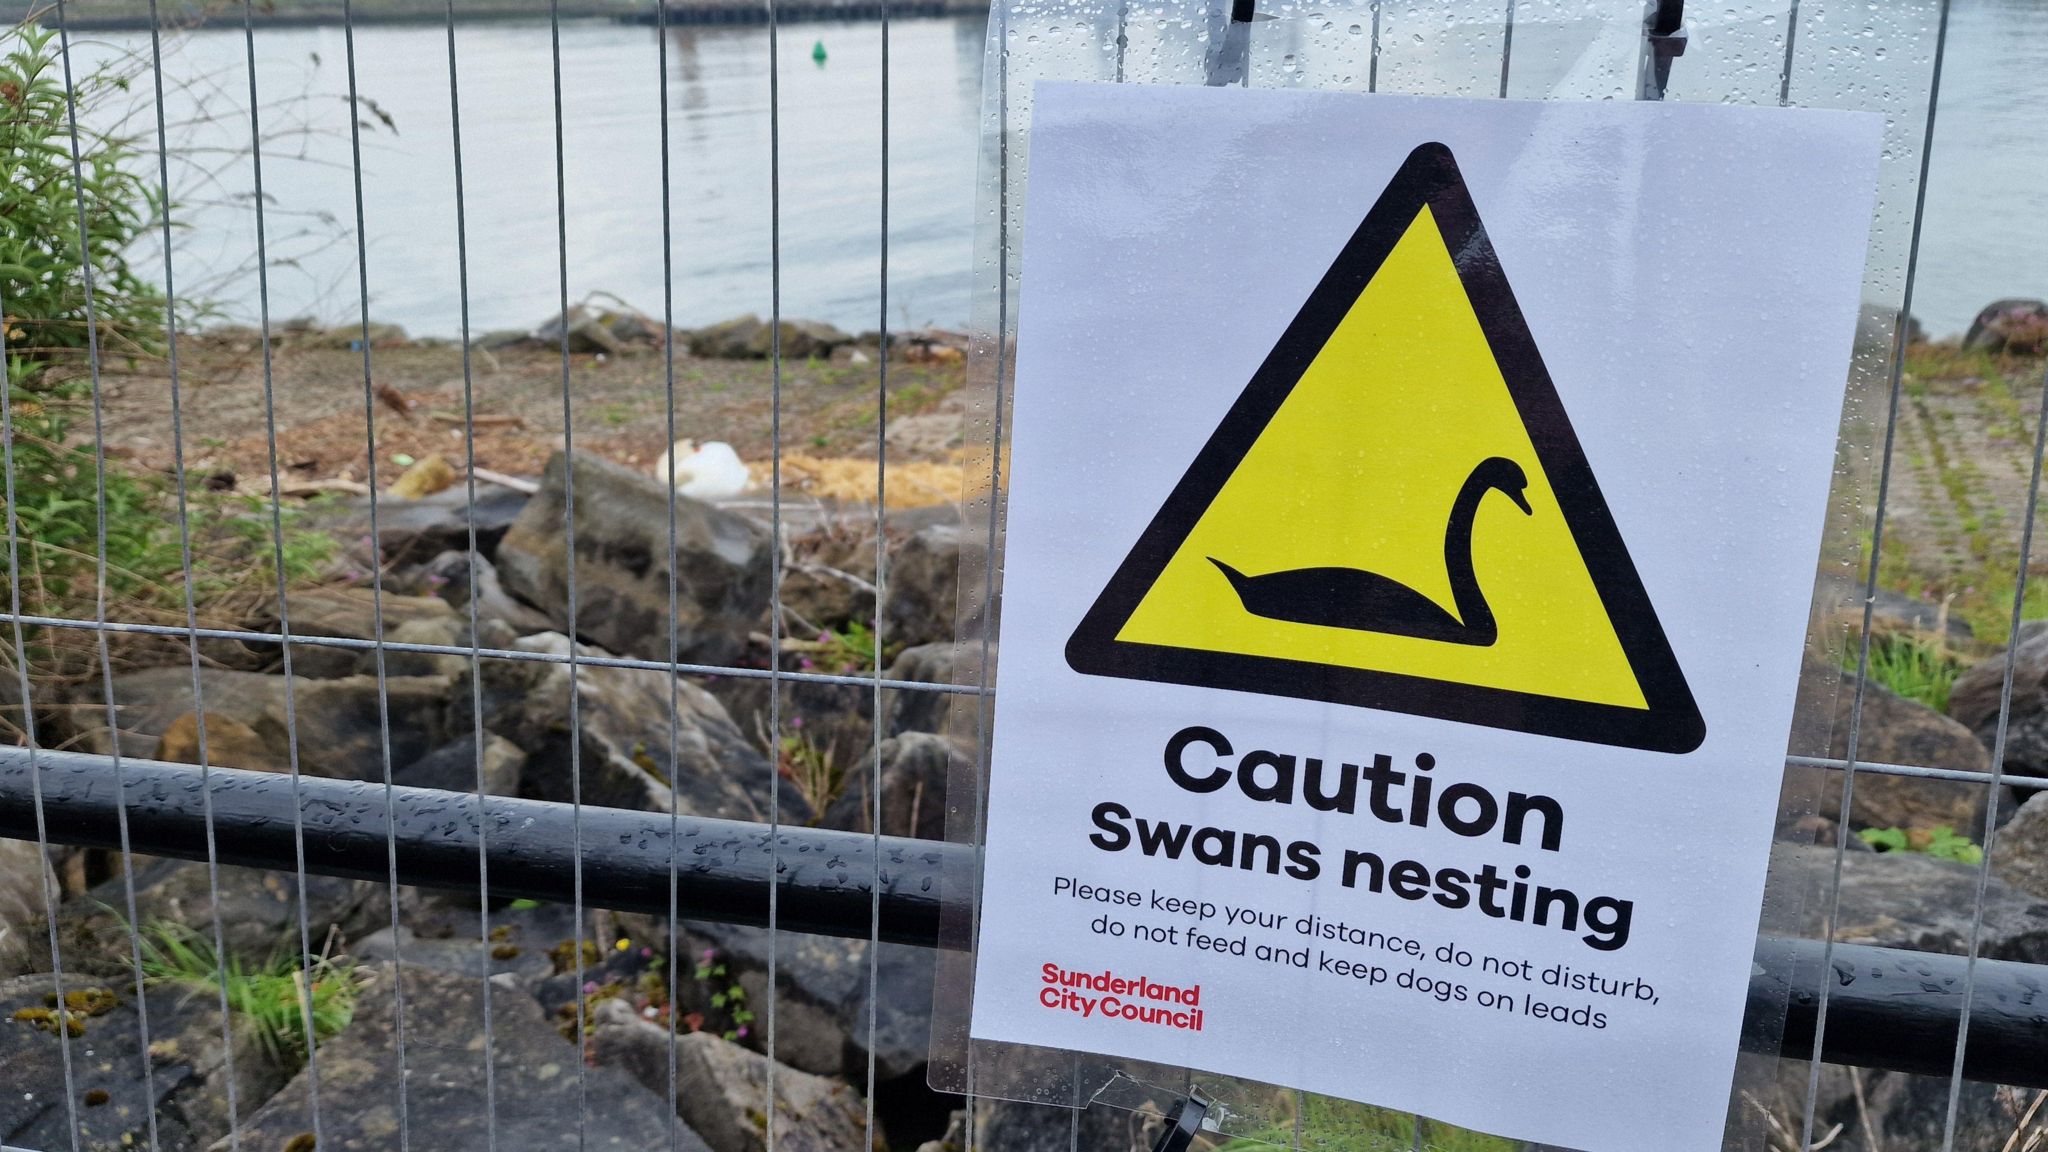 A sign put up by the council explaining why the area has been fenced off due to swans nesting